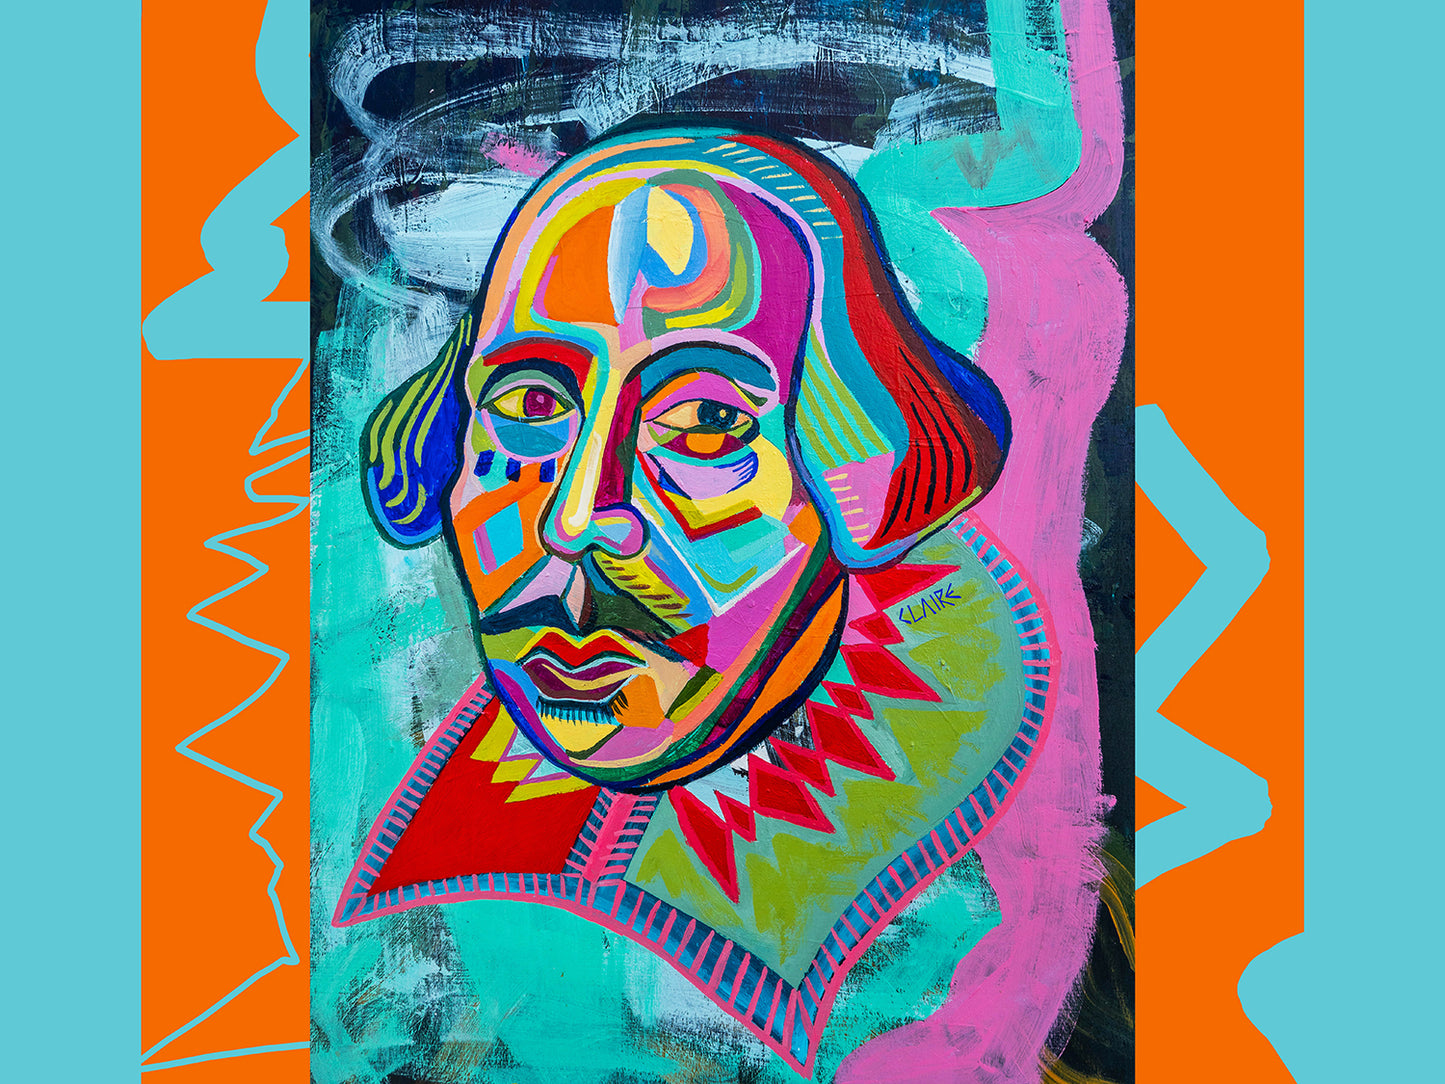 Groovy Shakespeare (Prints Available)